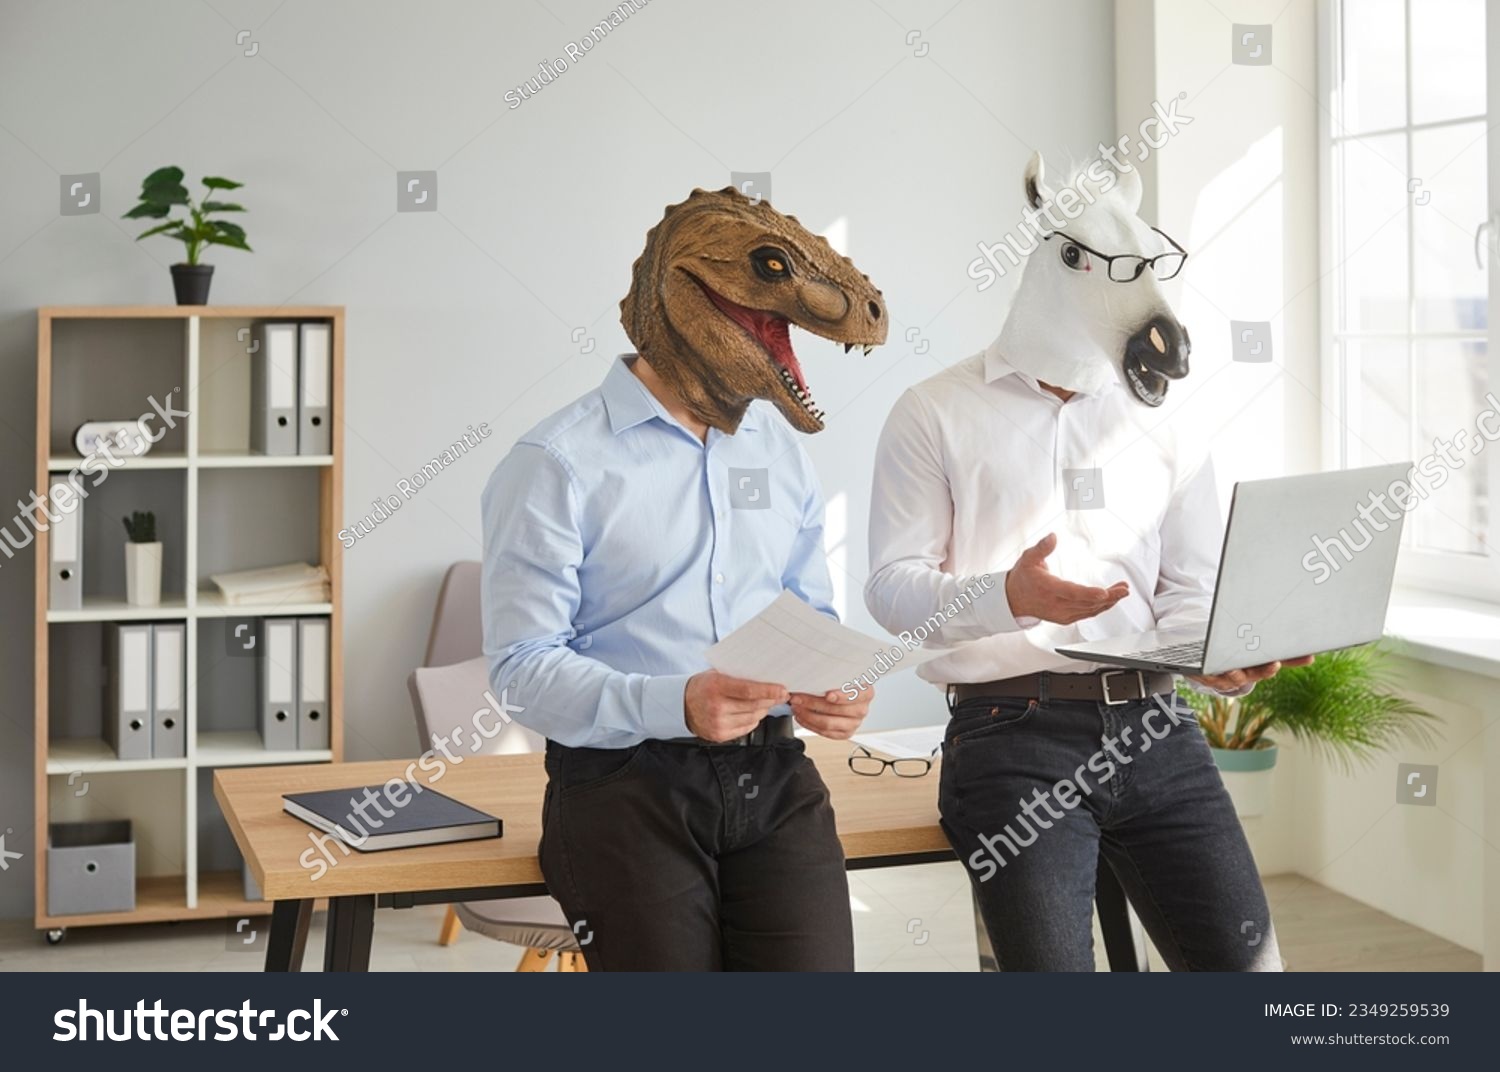 Funny animal people use computer at work. Team of 2 men in unusual masquerade dinosaur and horse masks standing by desk in office workplace, preparing creative business presentation on laptop device #2349259539